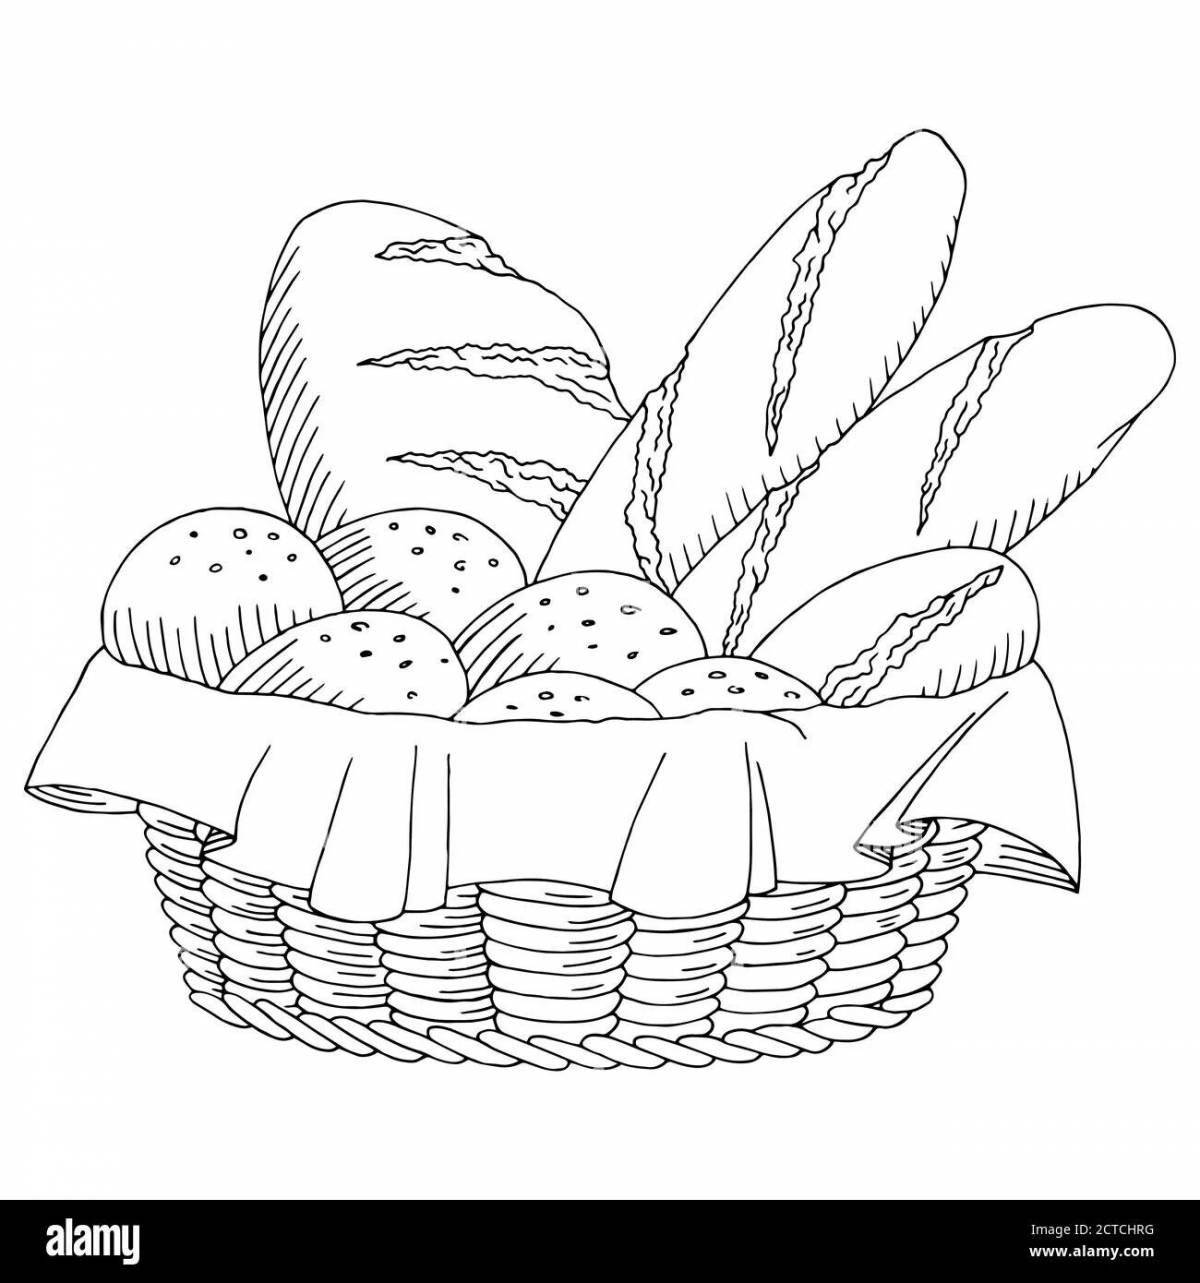 Walnut loaf of bread coloring book for children